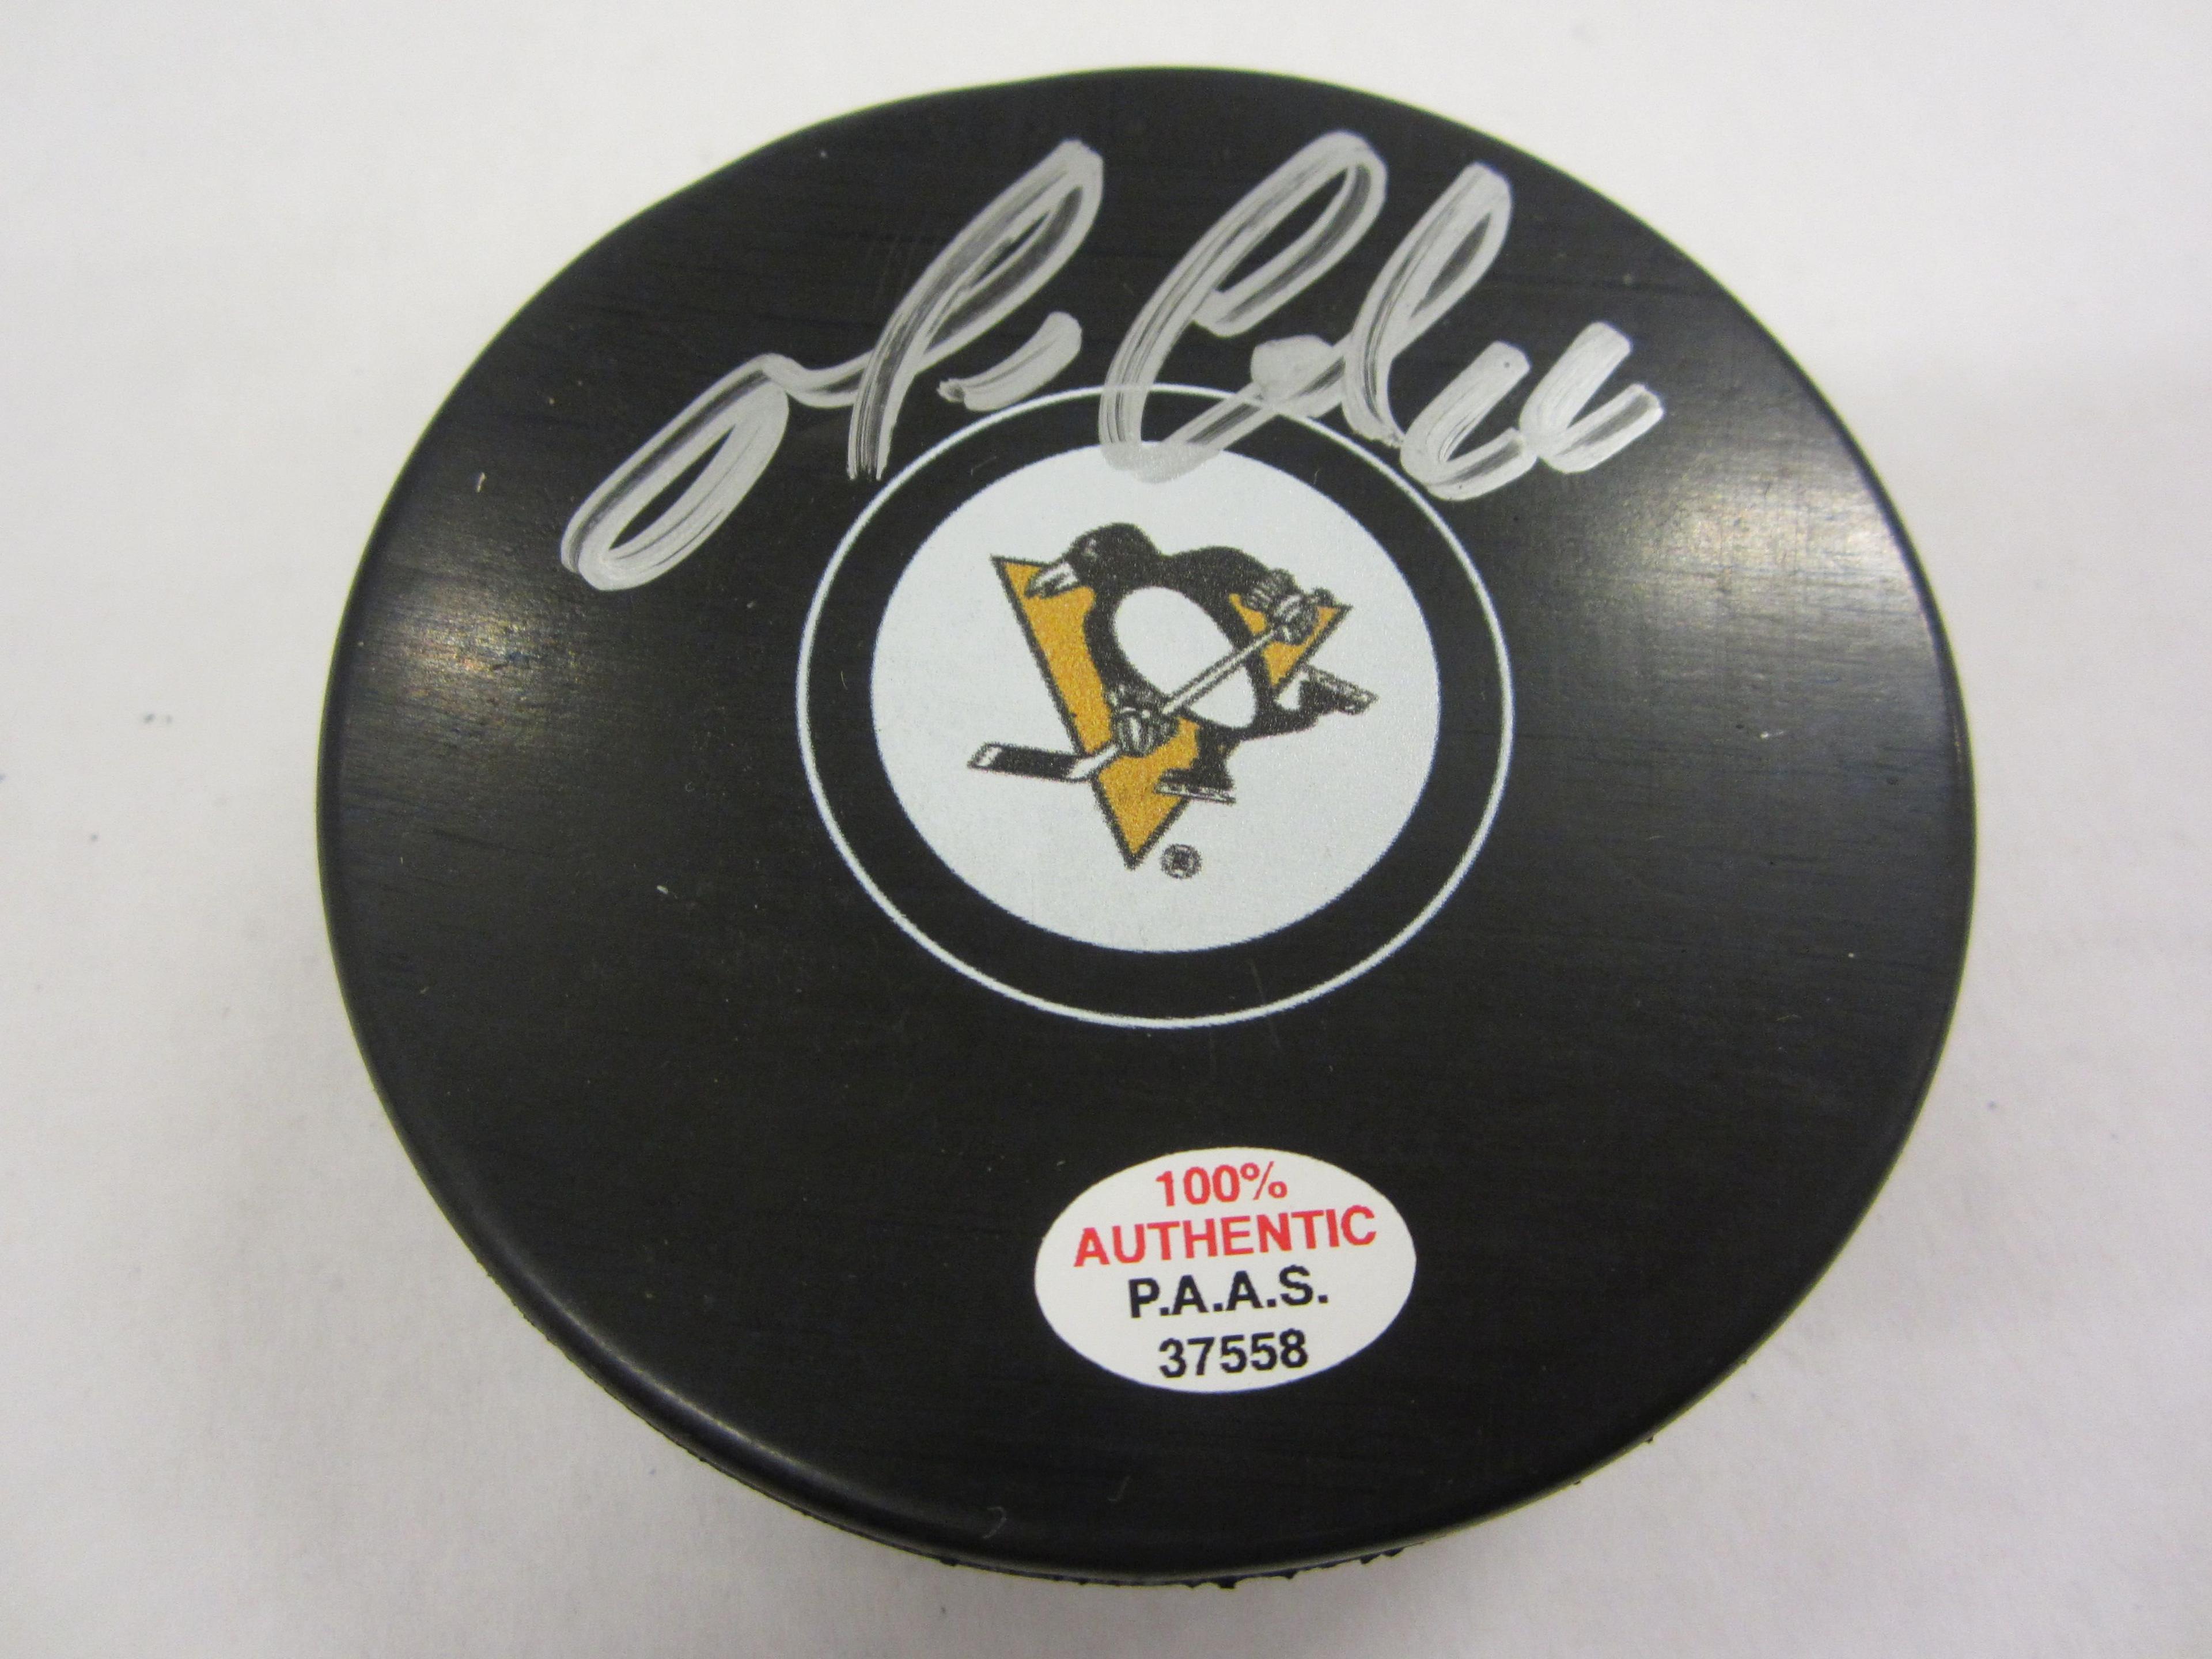 Mario Lemieux Pittsburgh Penguins Signed Autographed Hockey Puck Certified CoA